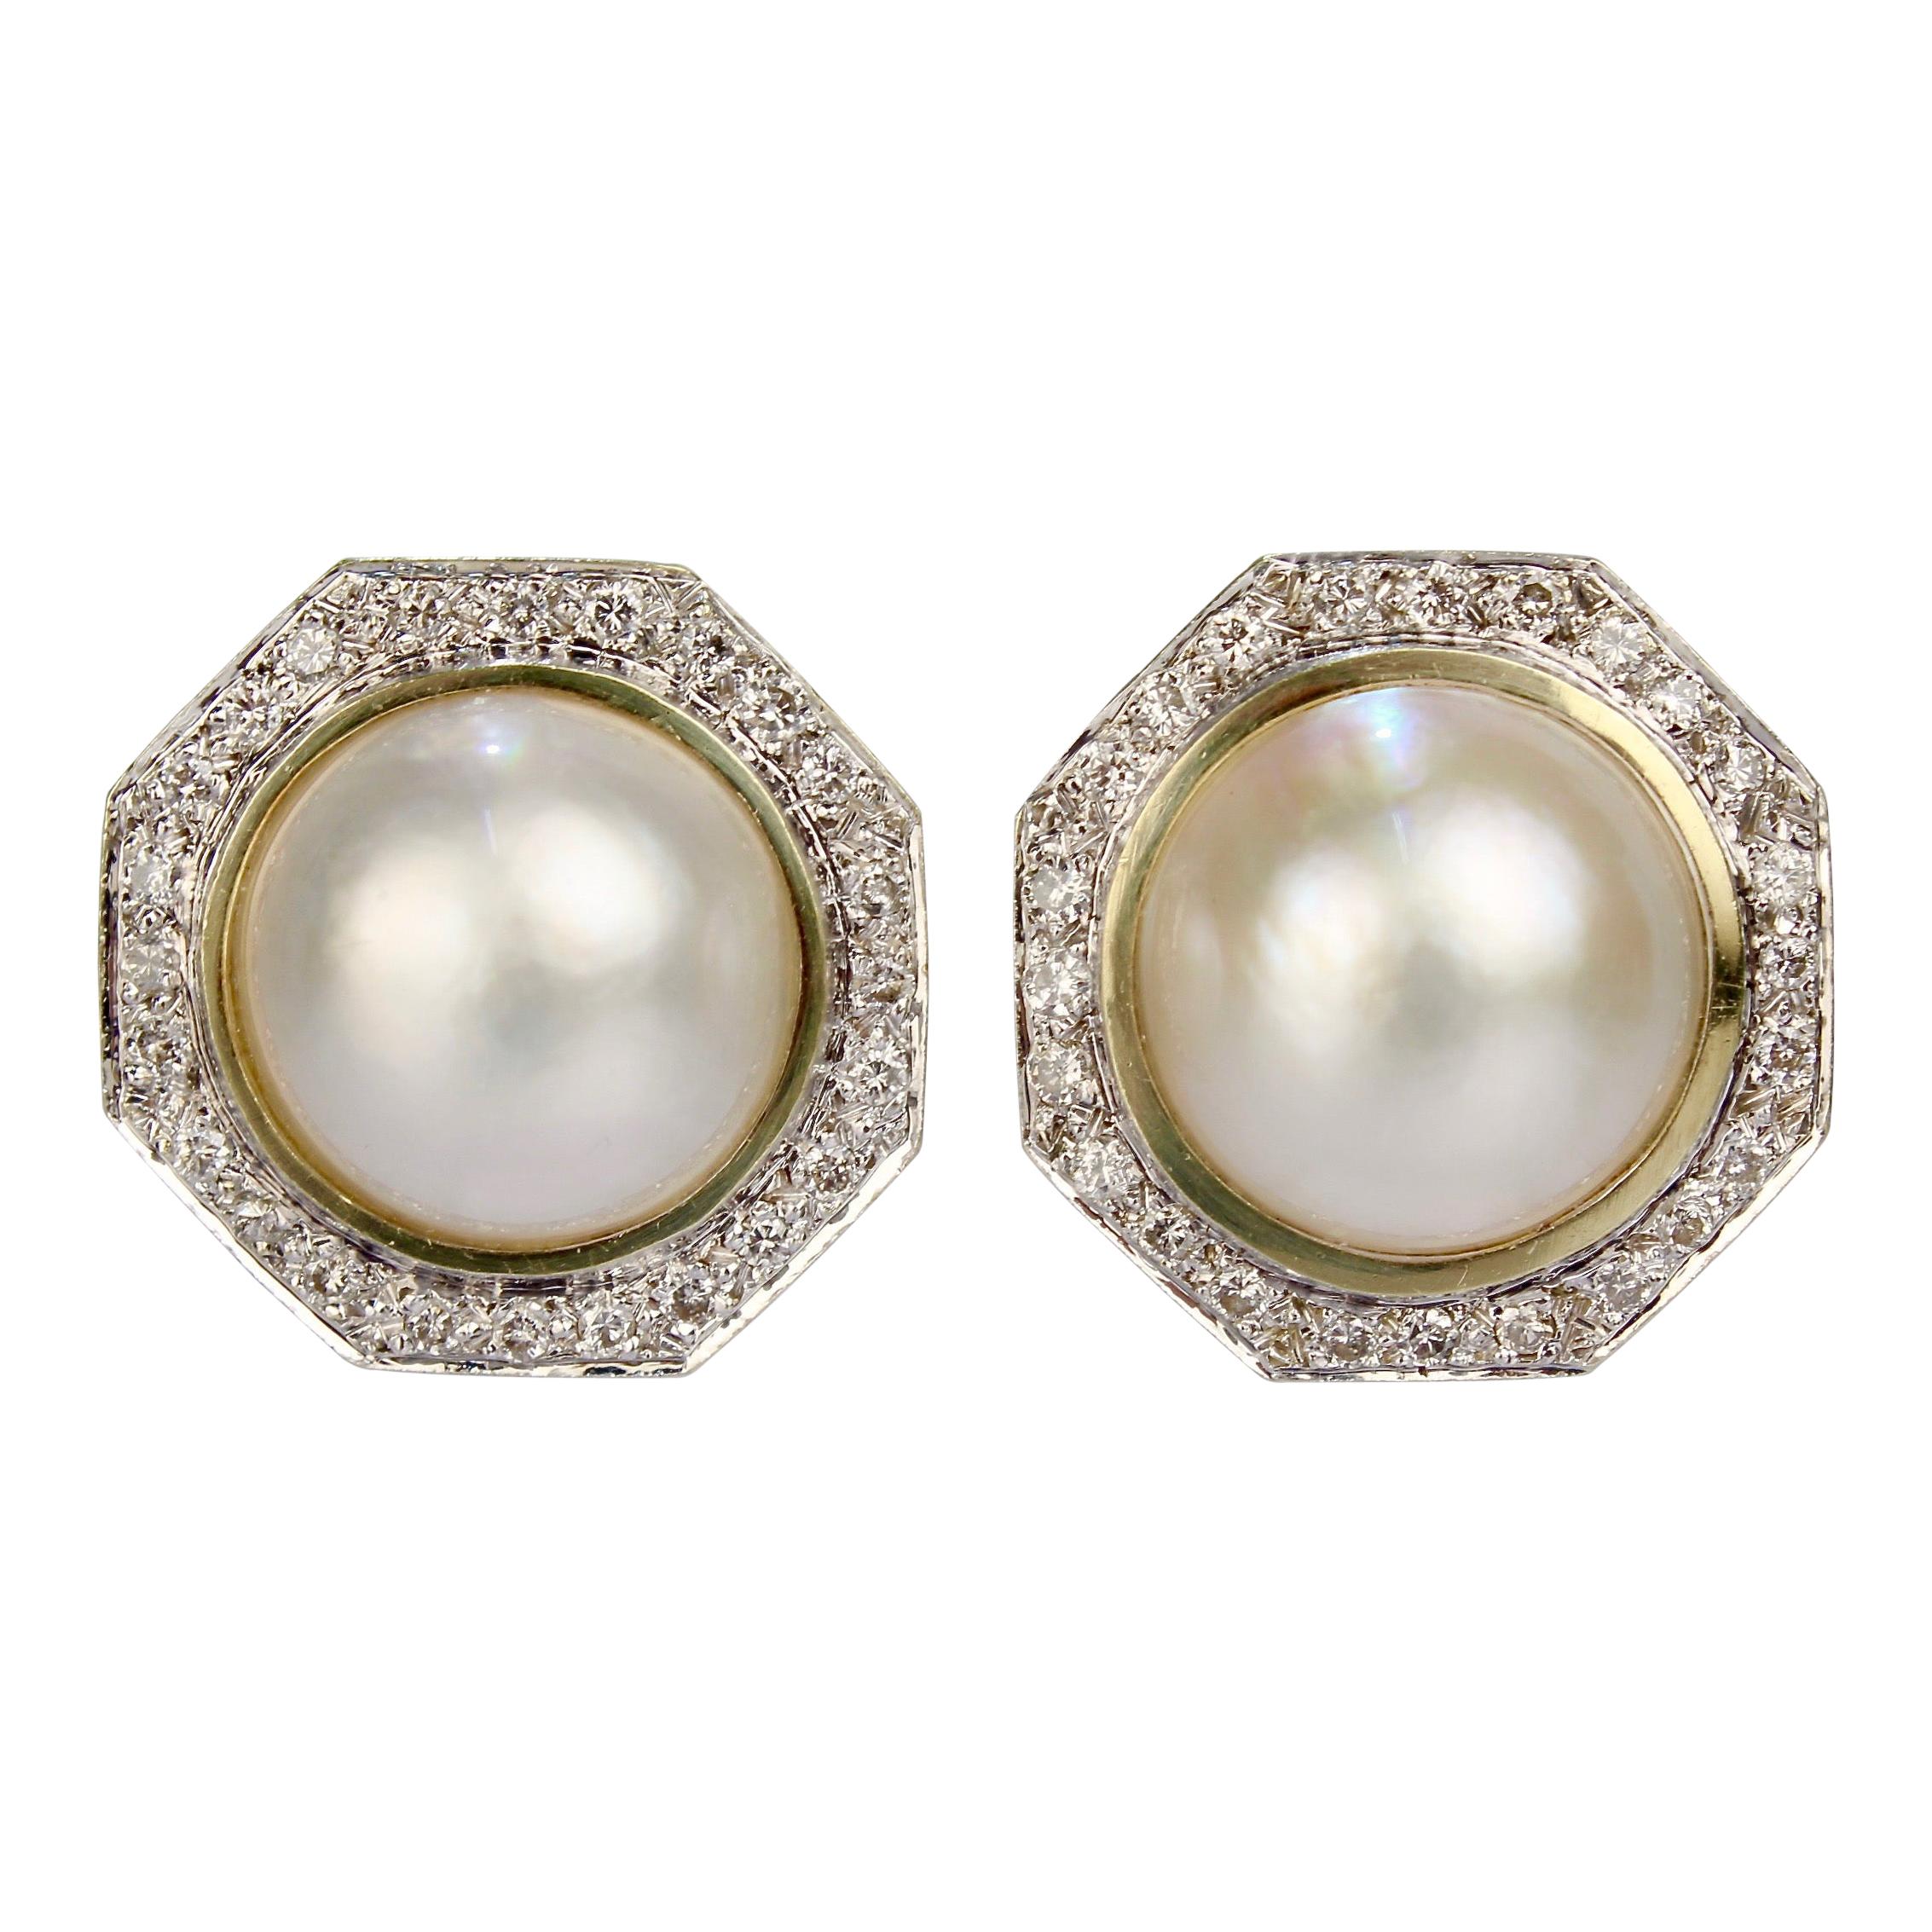 Retro 1980s Style 14 Karat Gold, Diamond, and Mabe Pearl Omega Clip Earrings